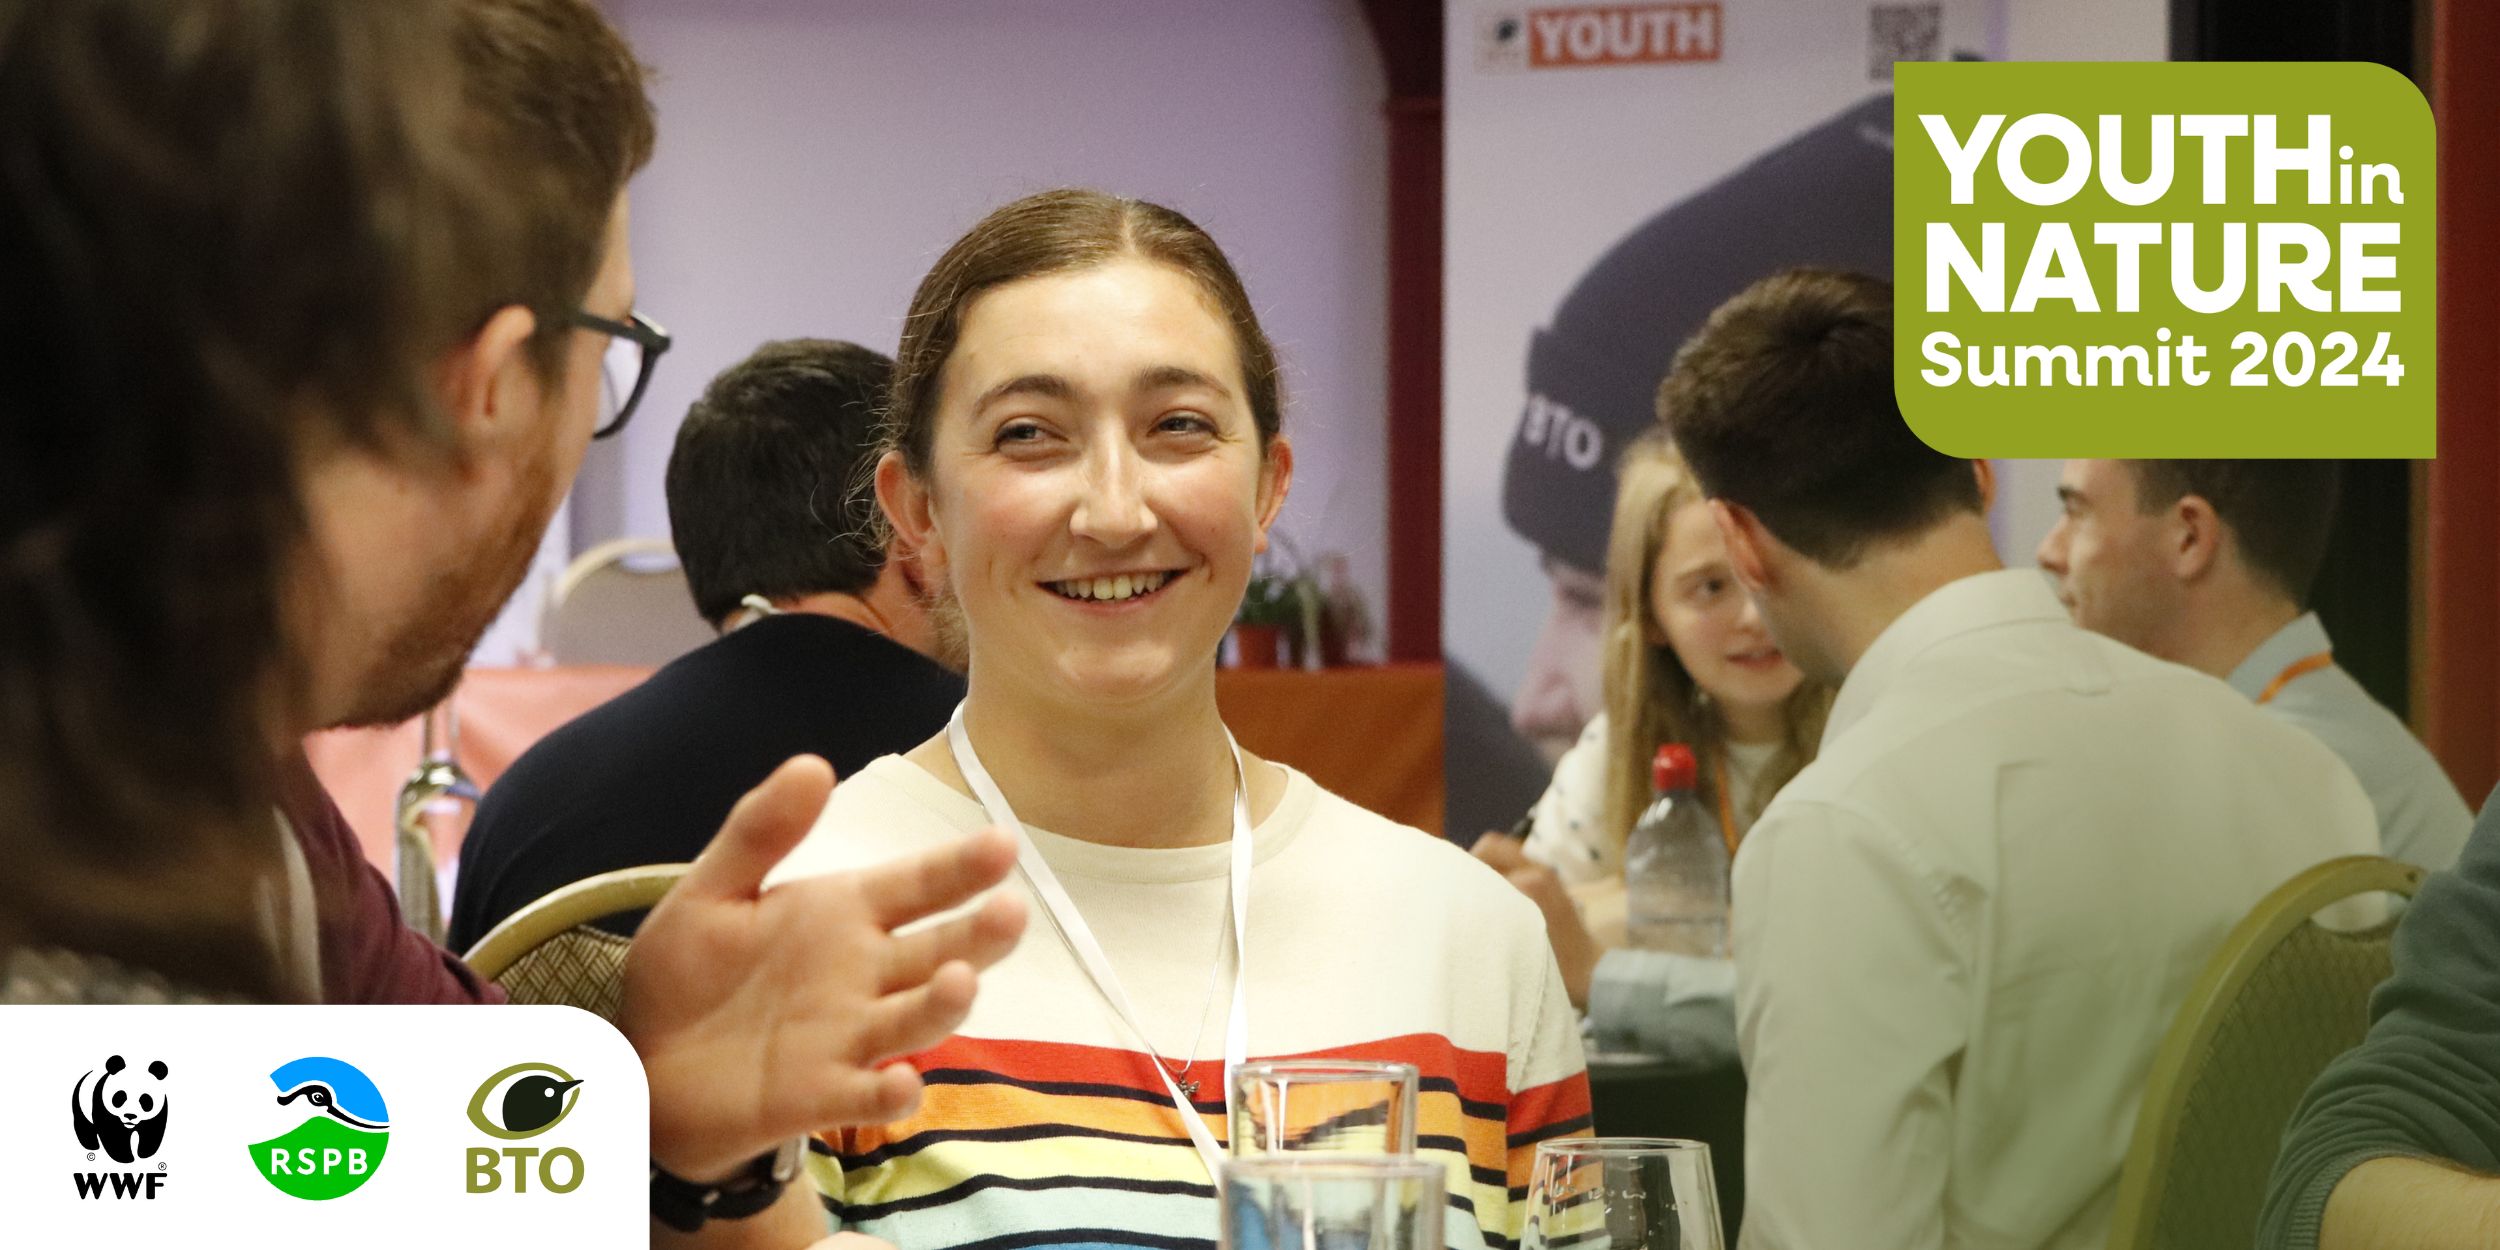 Youth in Nature Summit 2024: bringing together young people and leaders in the conservation sector. A partnership event with the British Trust for Ornithology, Royal Society for the Protection of Birds and World Wide Fund for Nature UK. 